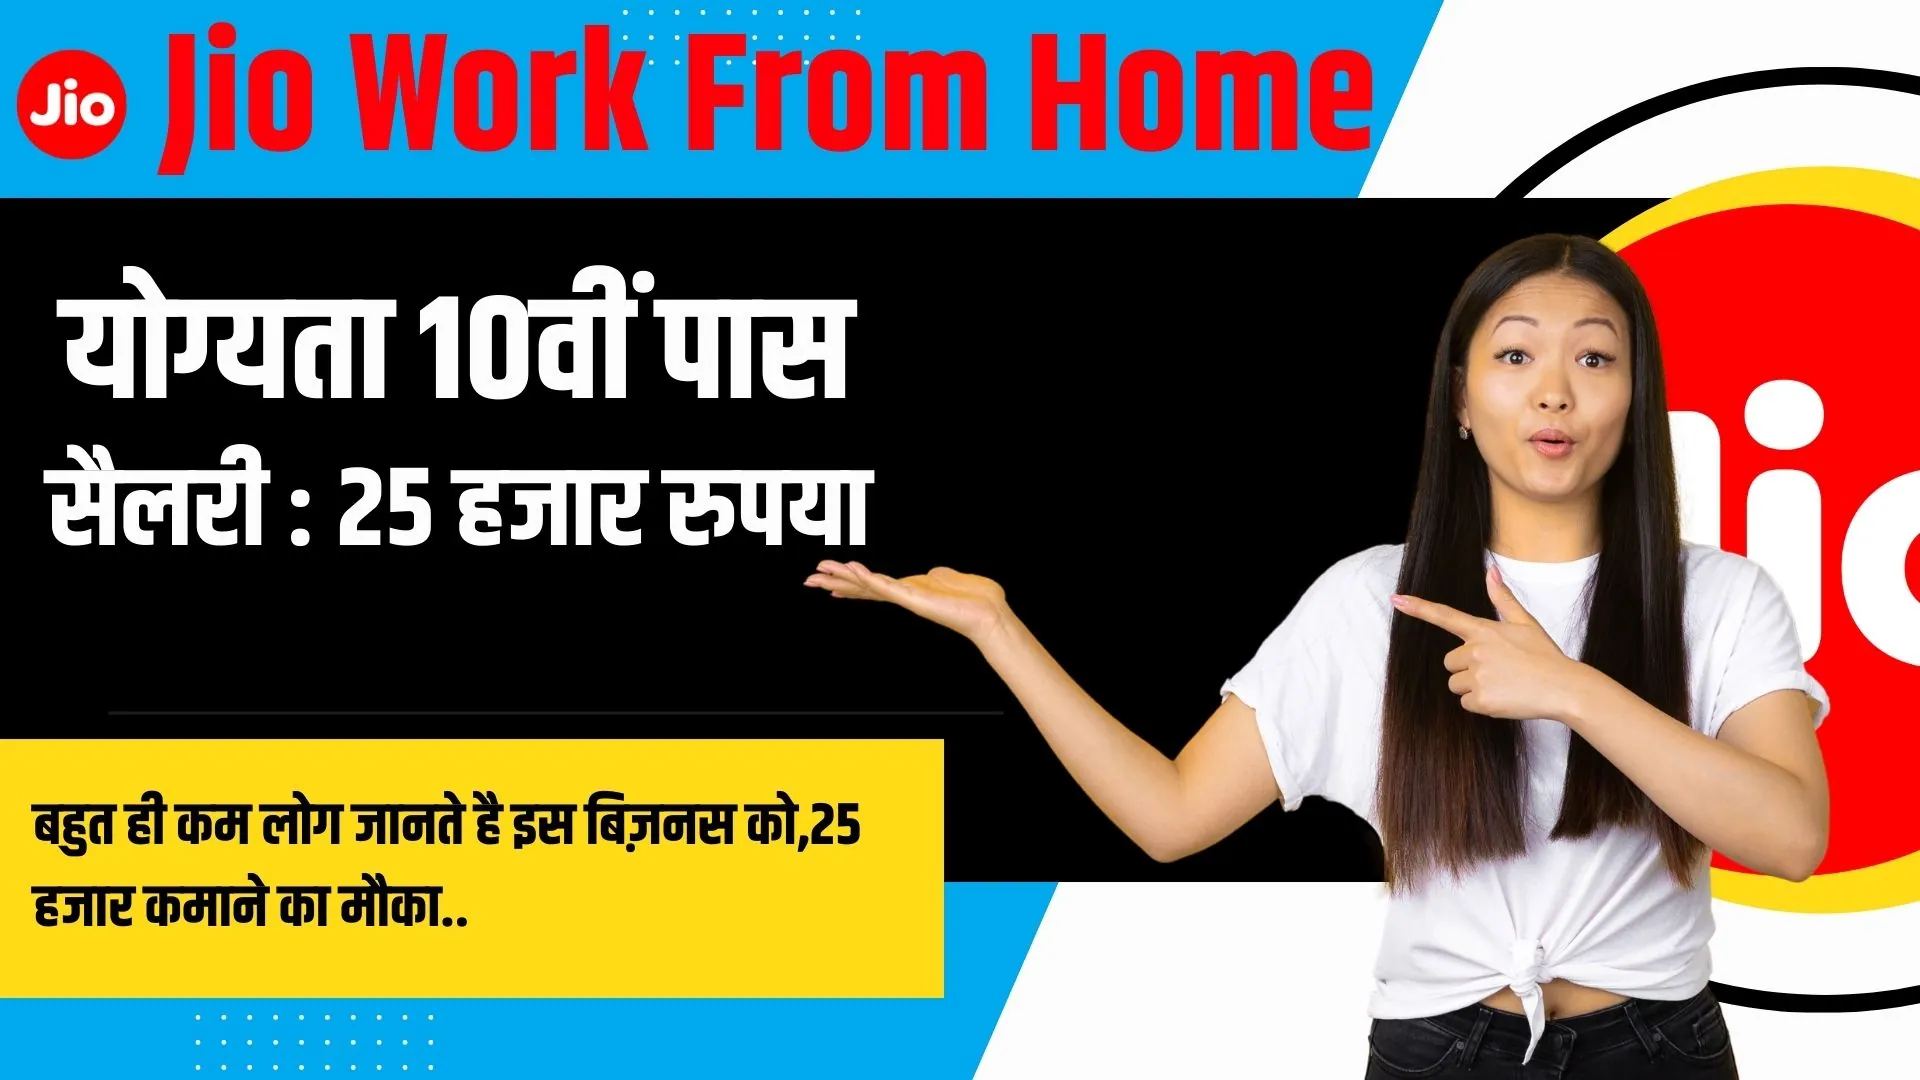 Jio Work From Home Job